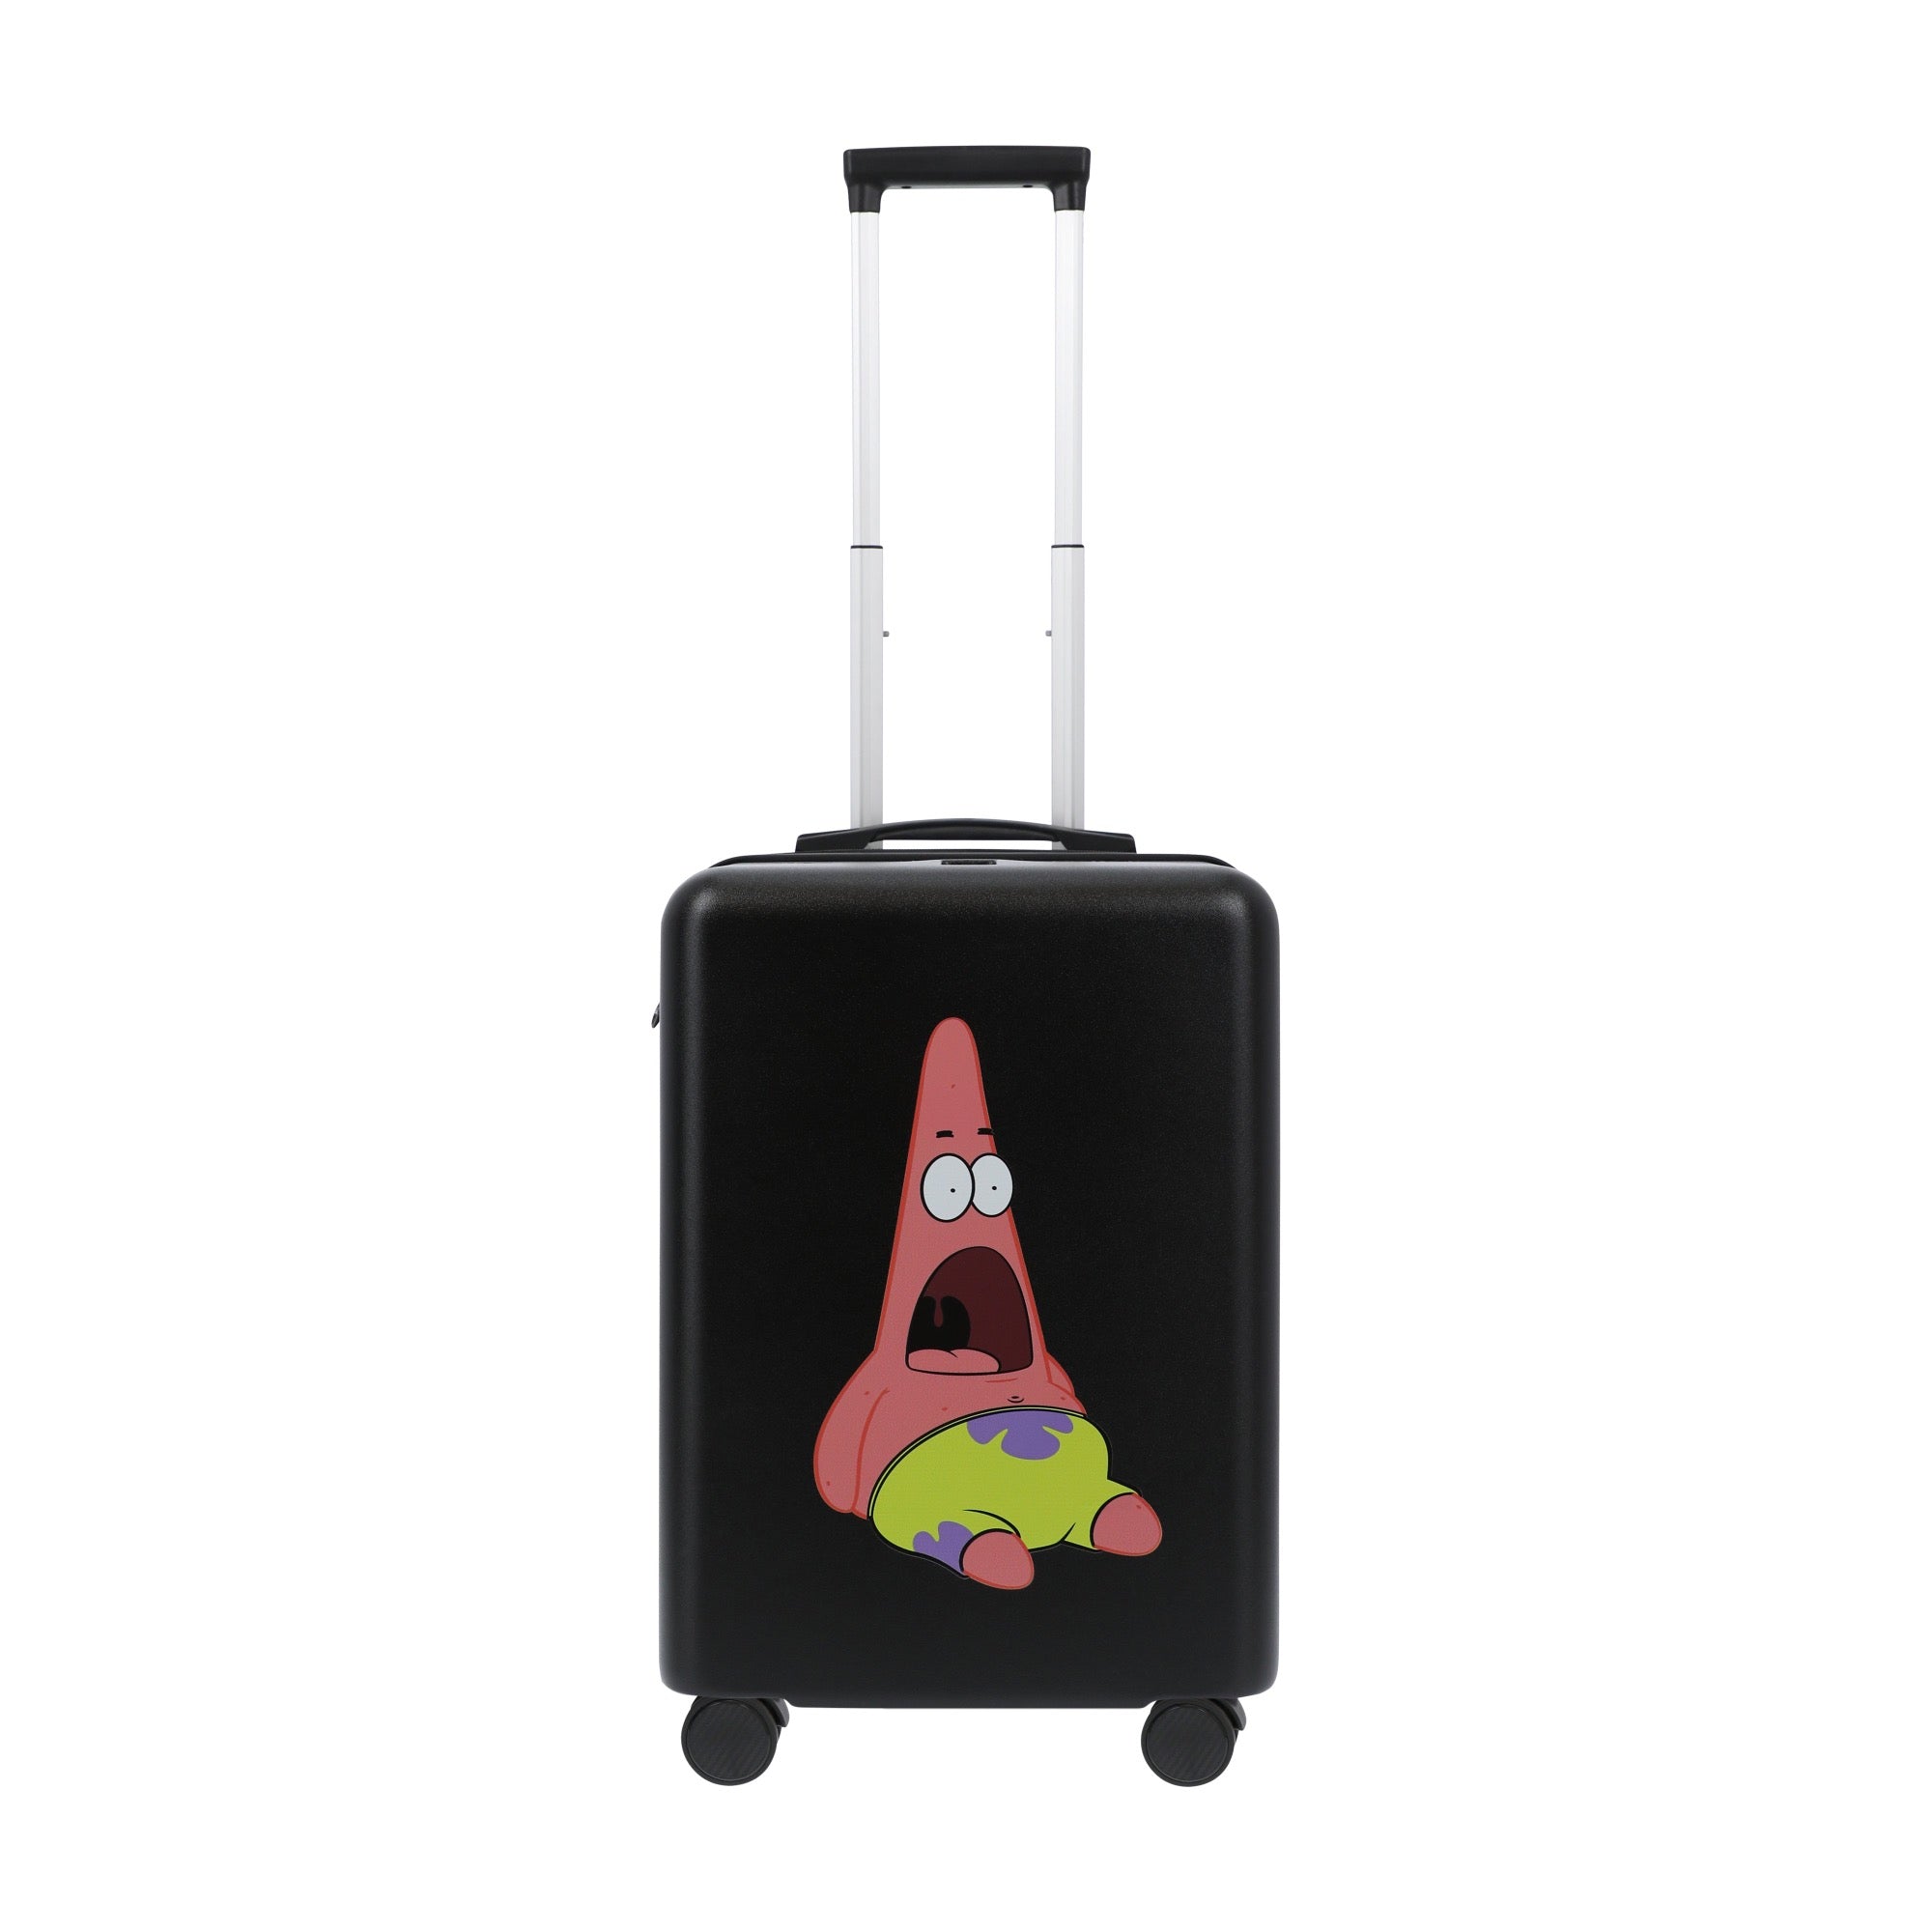 Black nickelodeon spongebob-patrick 22.5" carry-on spinner suitcase luggage by Ful